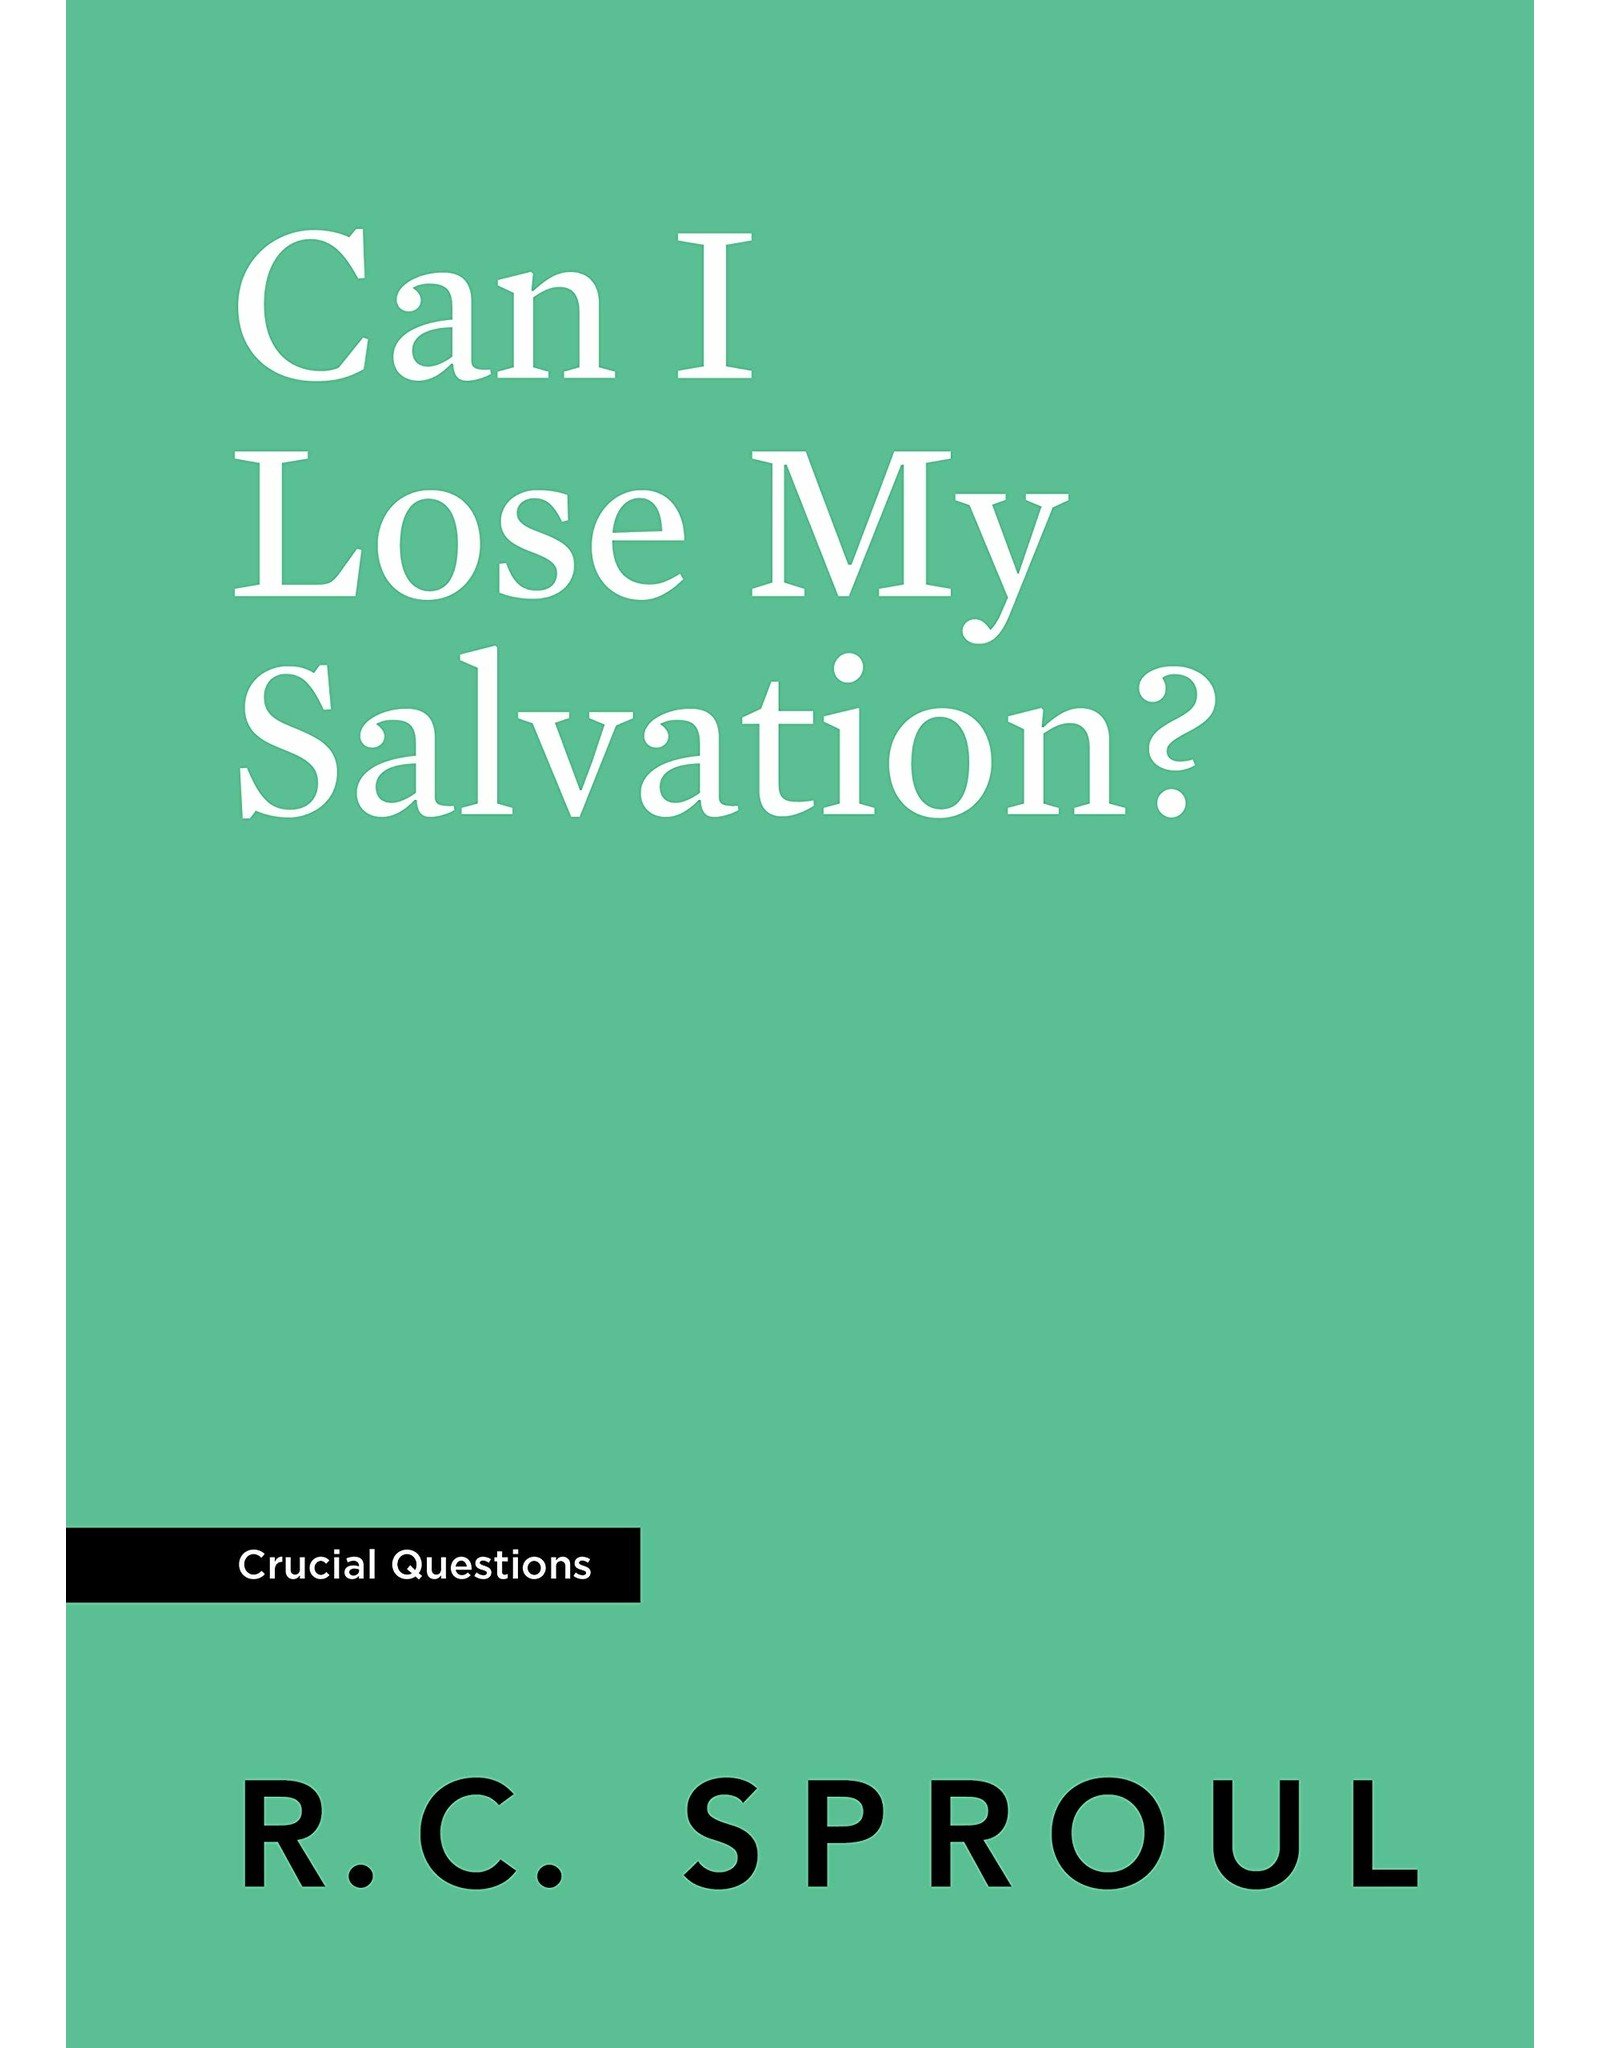 Ligonier / Reformation Trust Can I Lose My Salvation? (Crucial Questions Series)